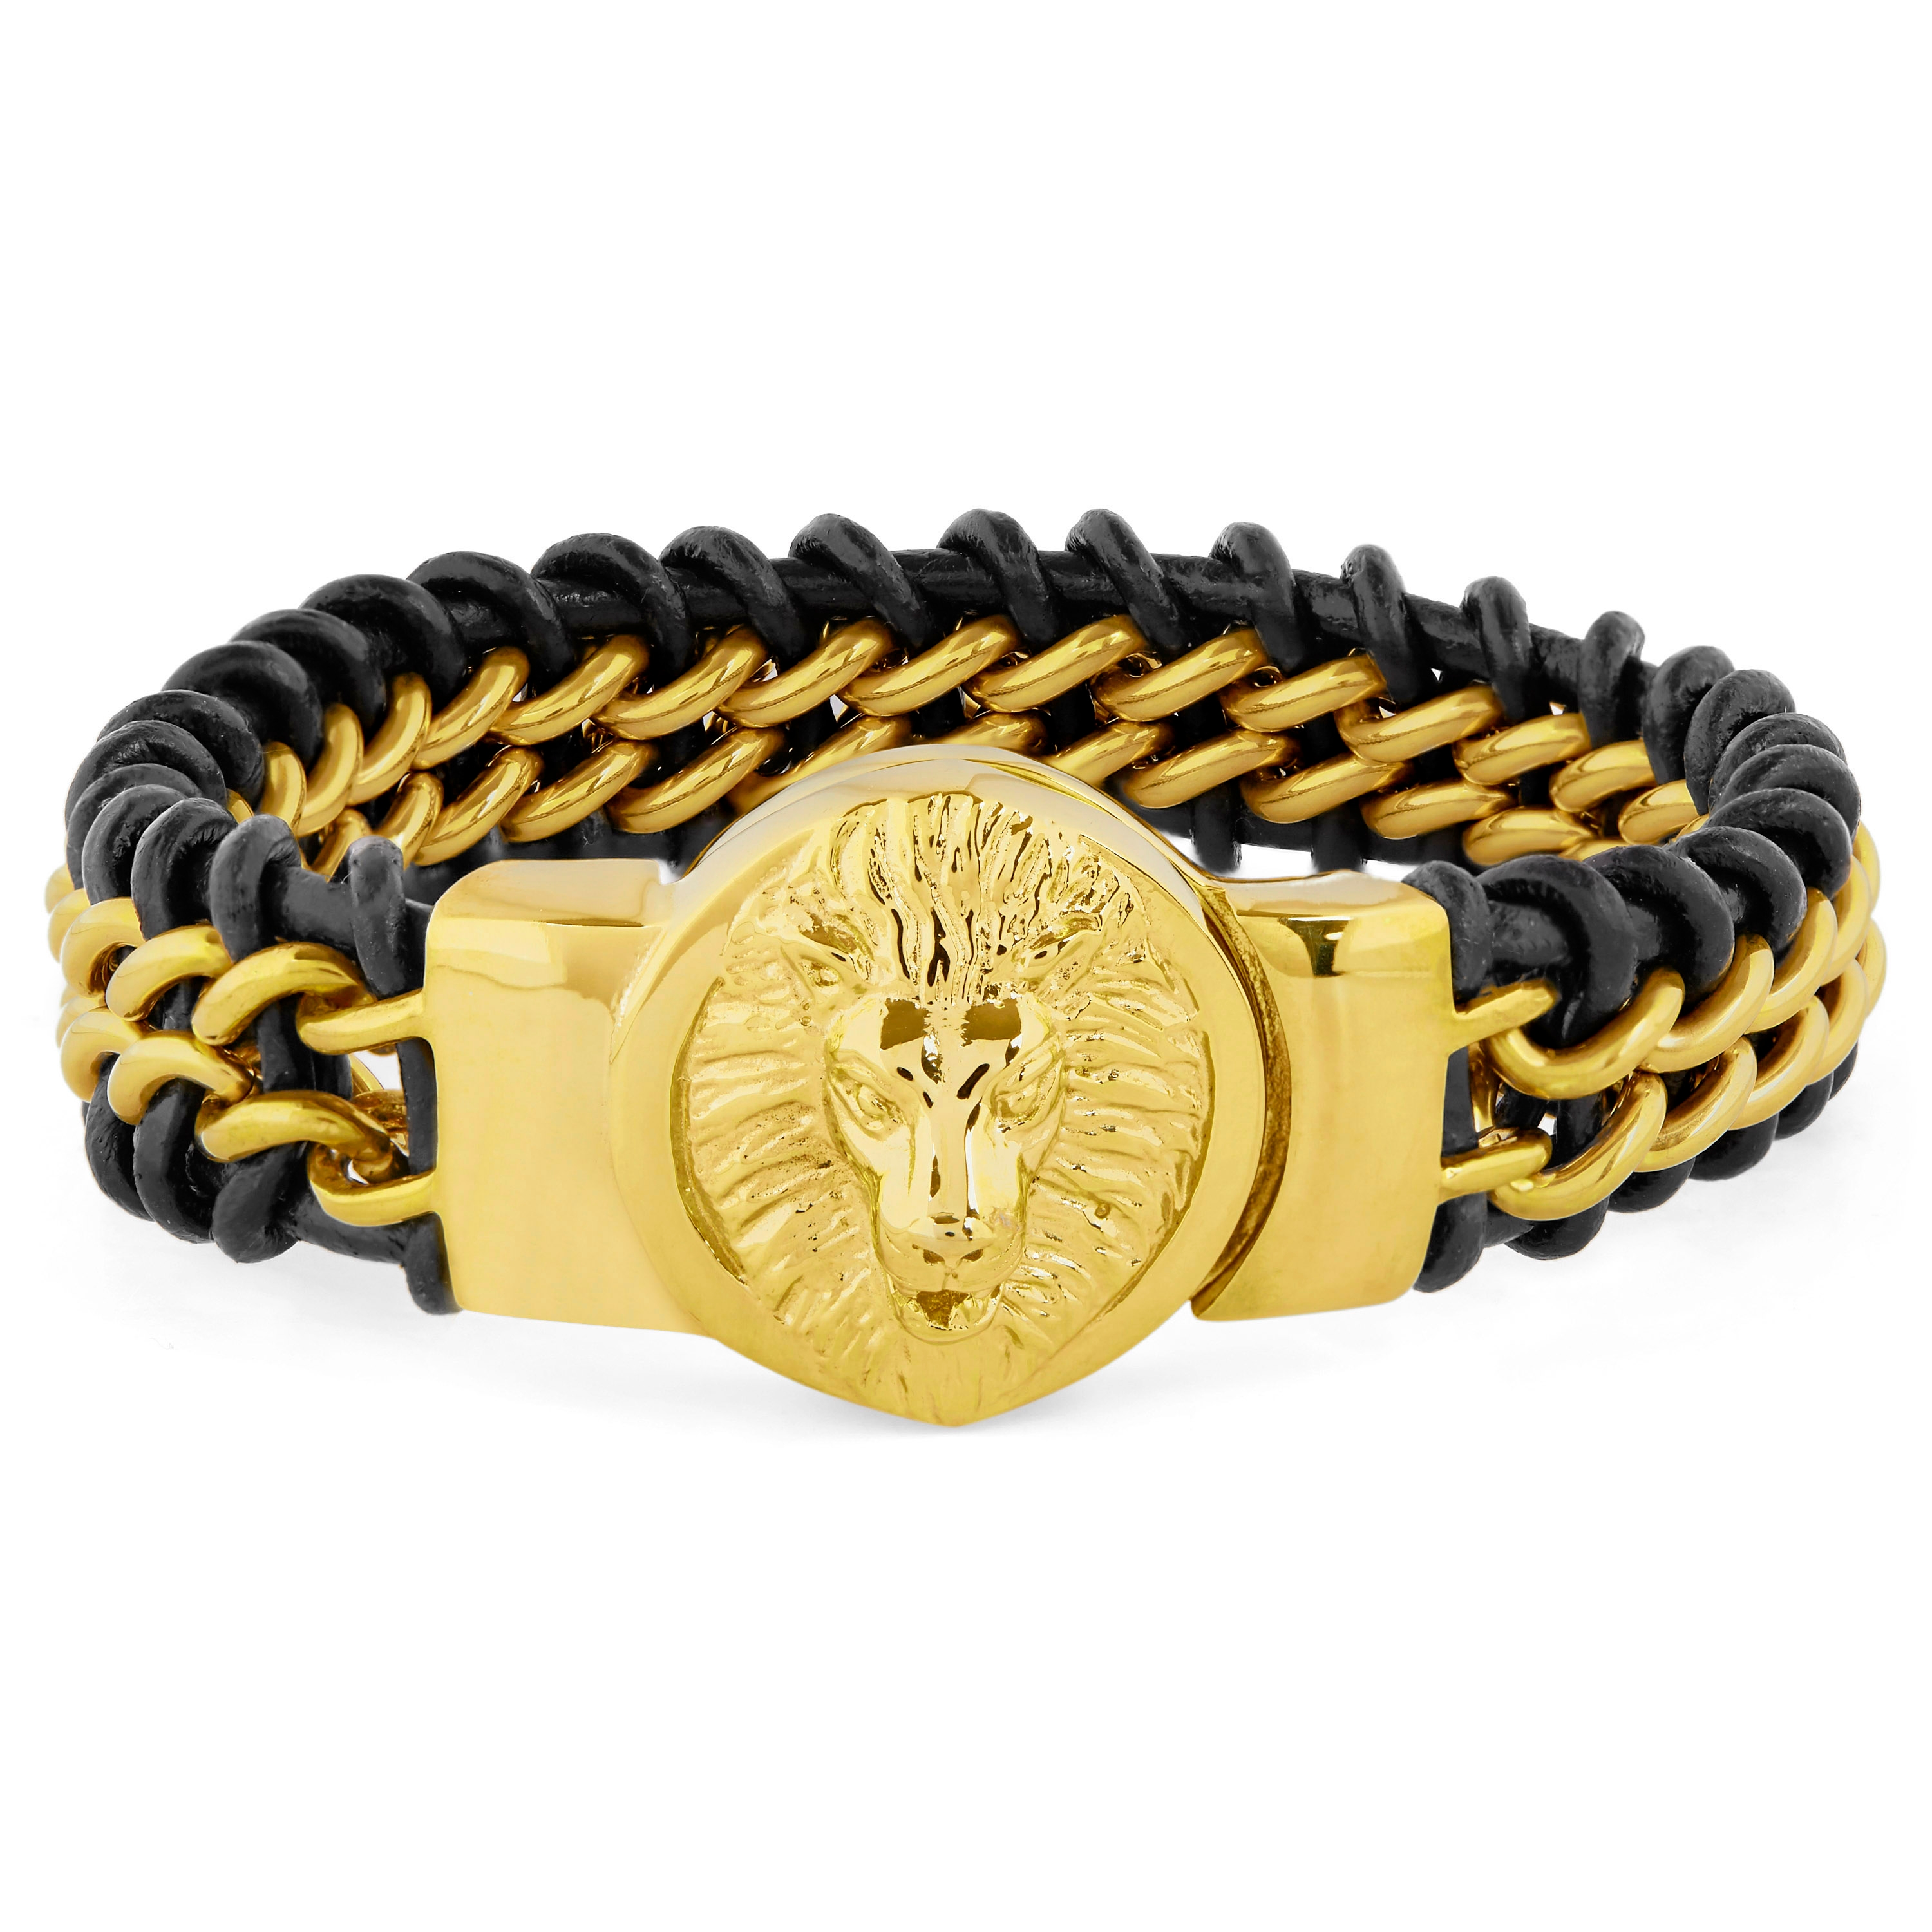 18KT Gold, Diamond, and Enamel Lion's Head Bracelet (Lot 4 - The Estate of  the late Richard C. Siskey and Diane Siskey presented by Iron Horse Auction  Co. and Leland Little AuctionsJul 20, 2017, 11:00am)